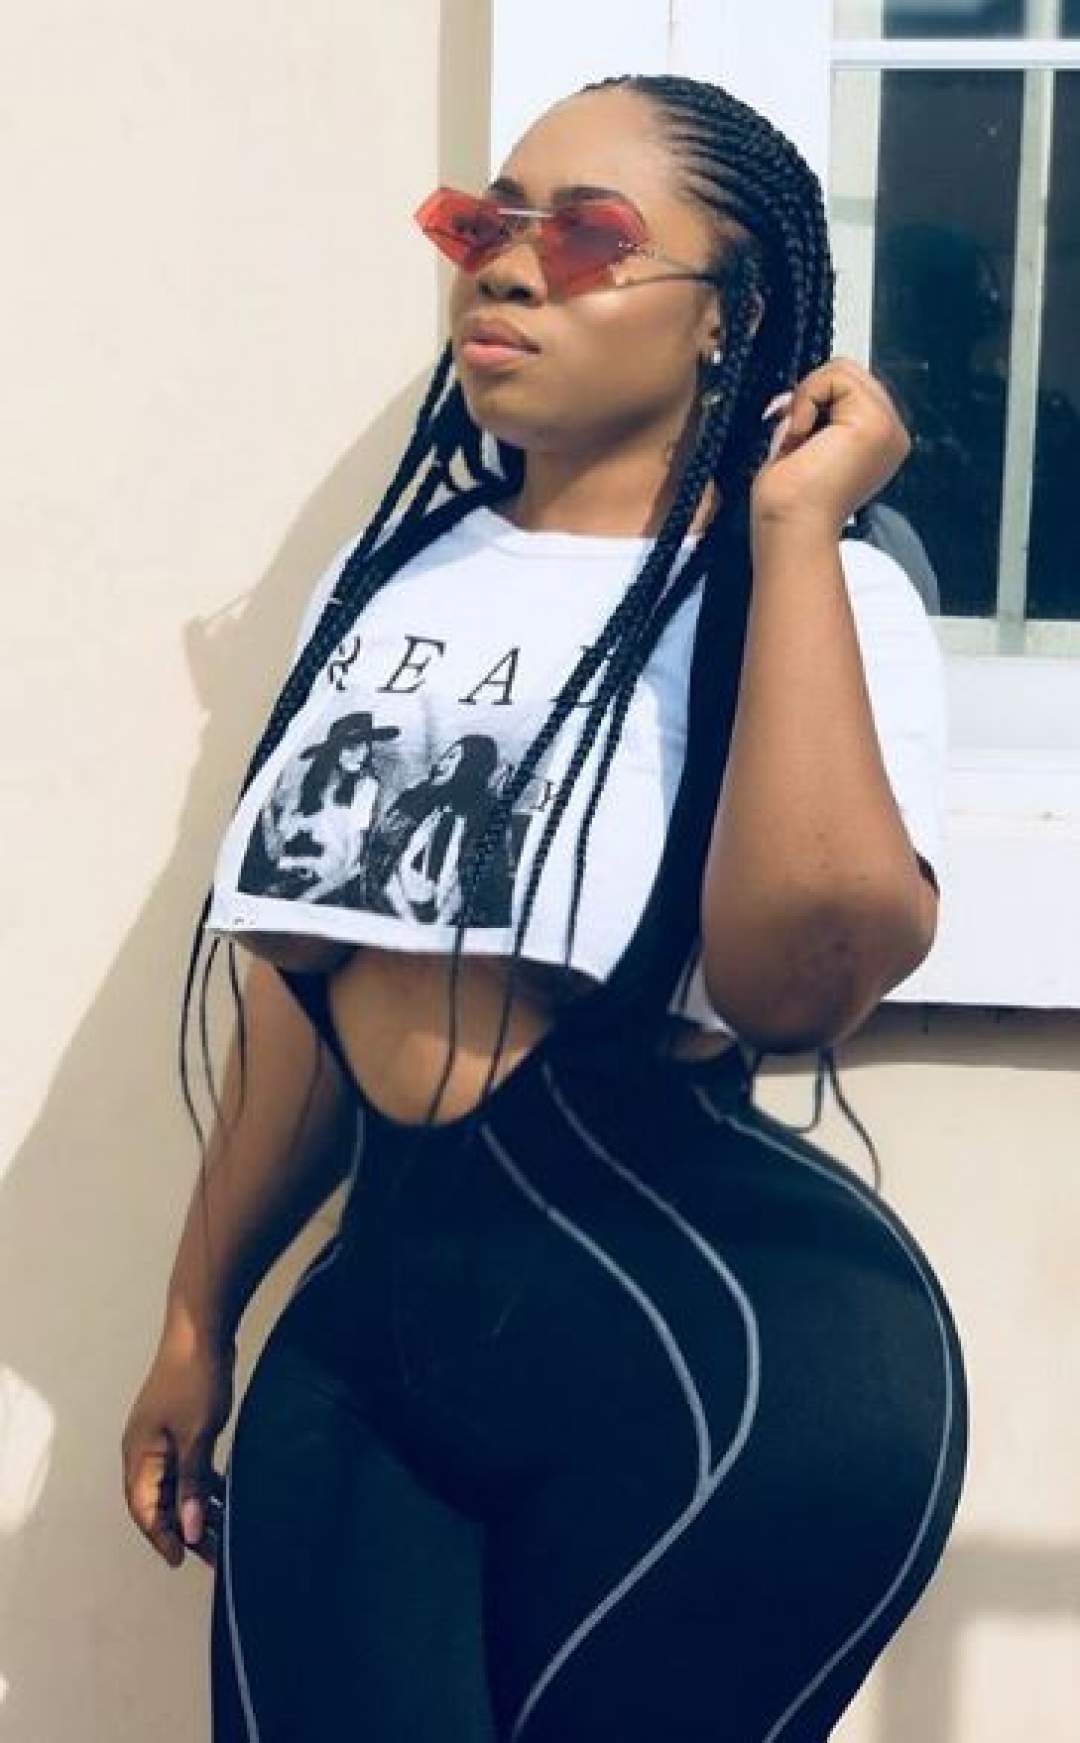 I am younger and not ready to marry - 28-Year-Old Curvy Ghanaian Actress, Moesha Boduong